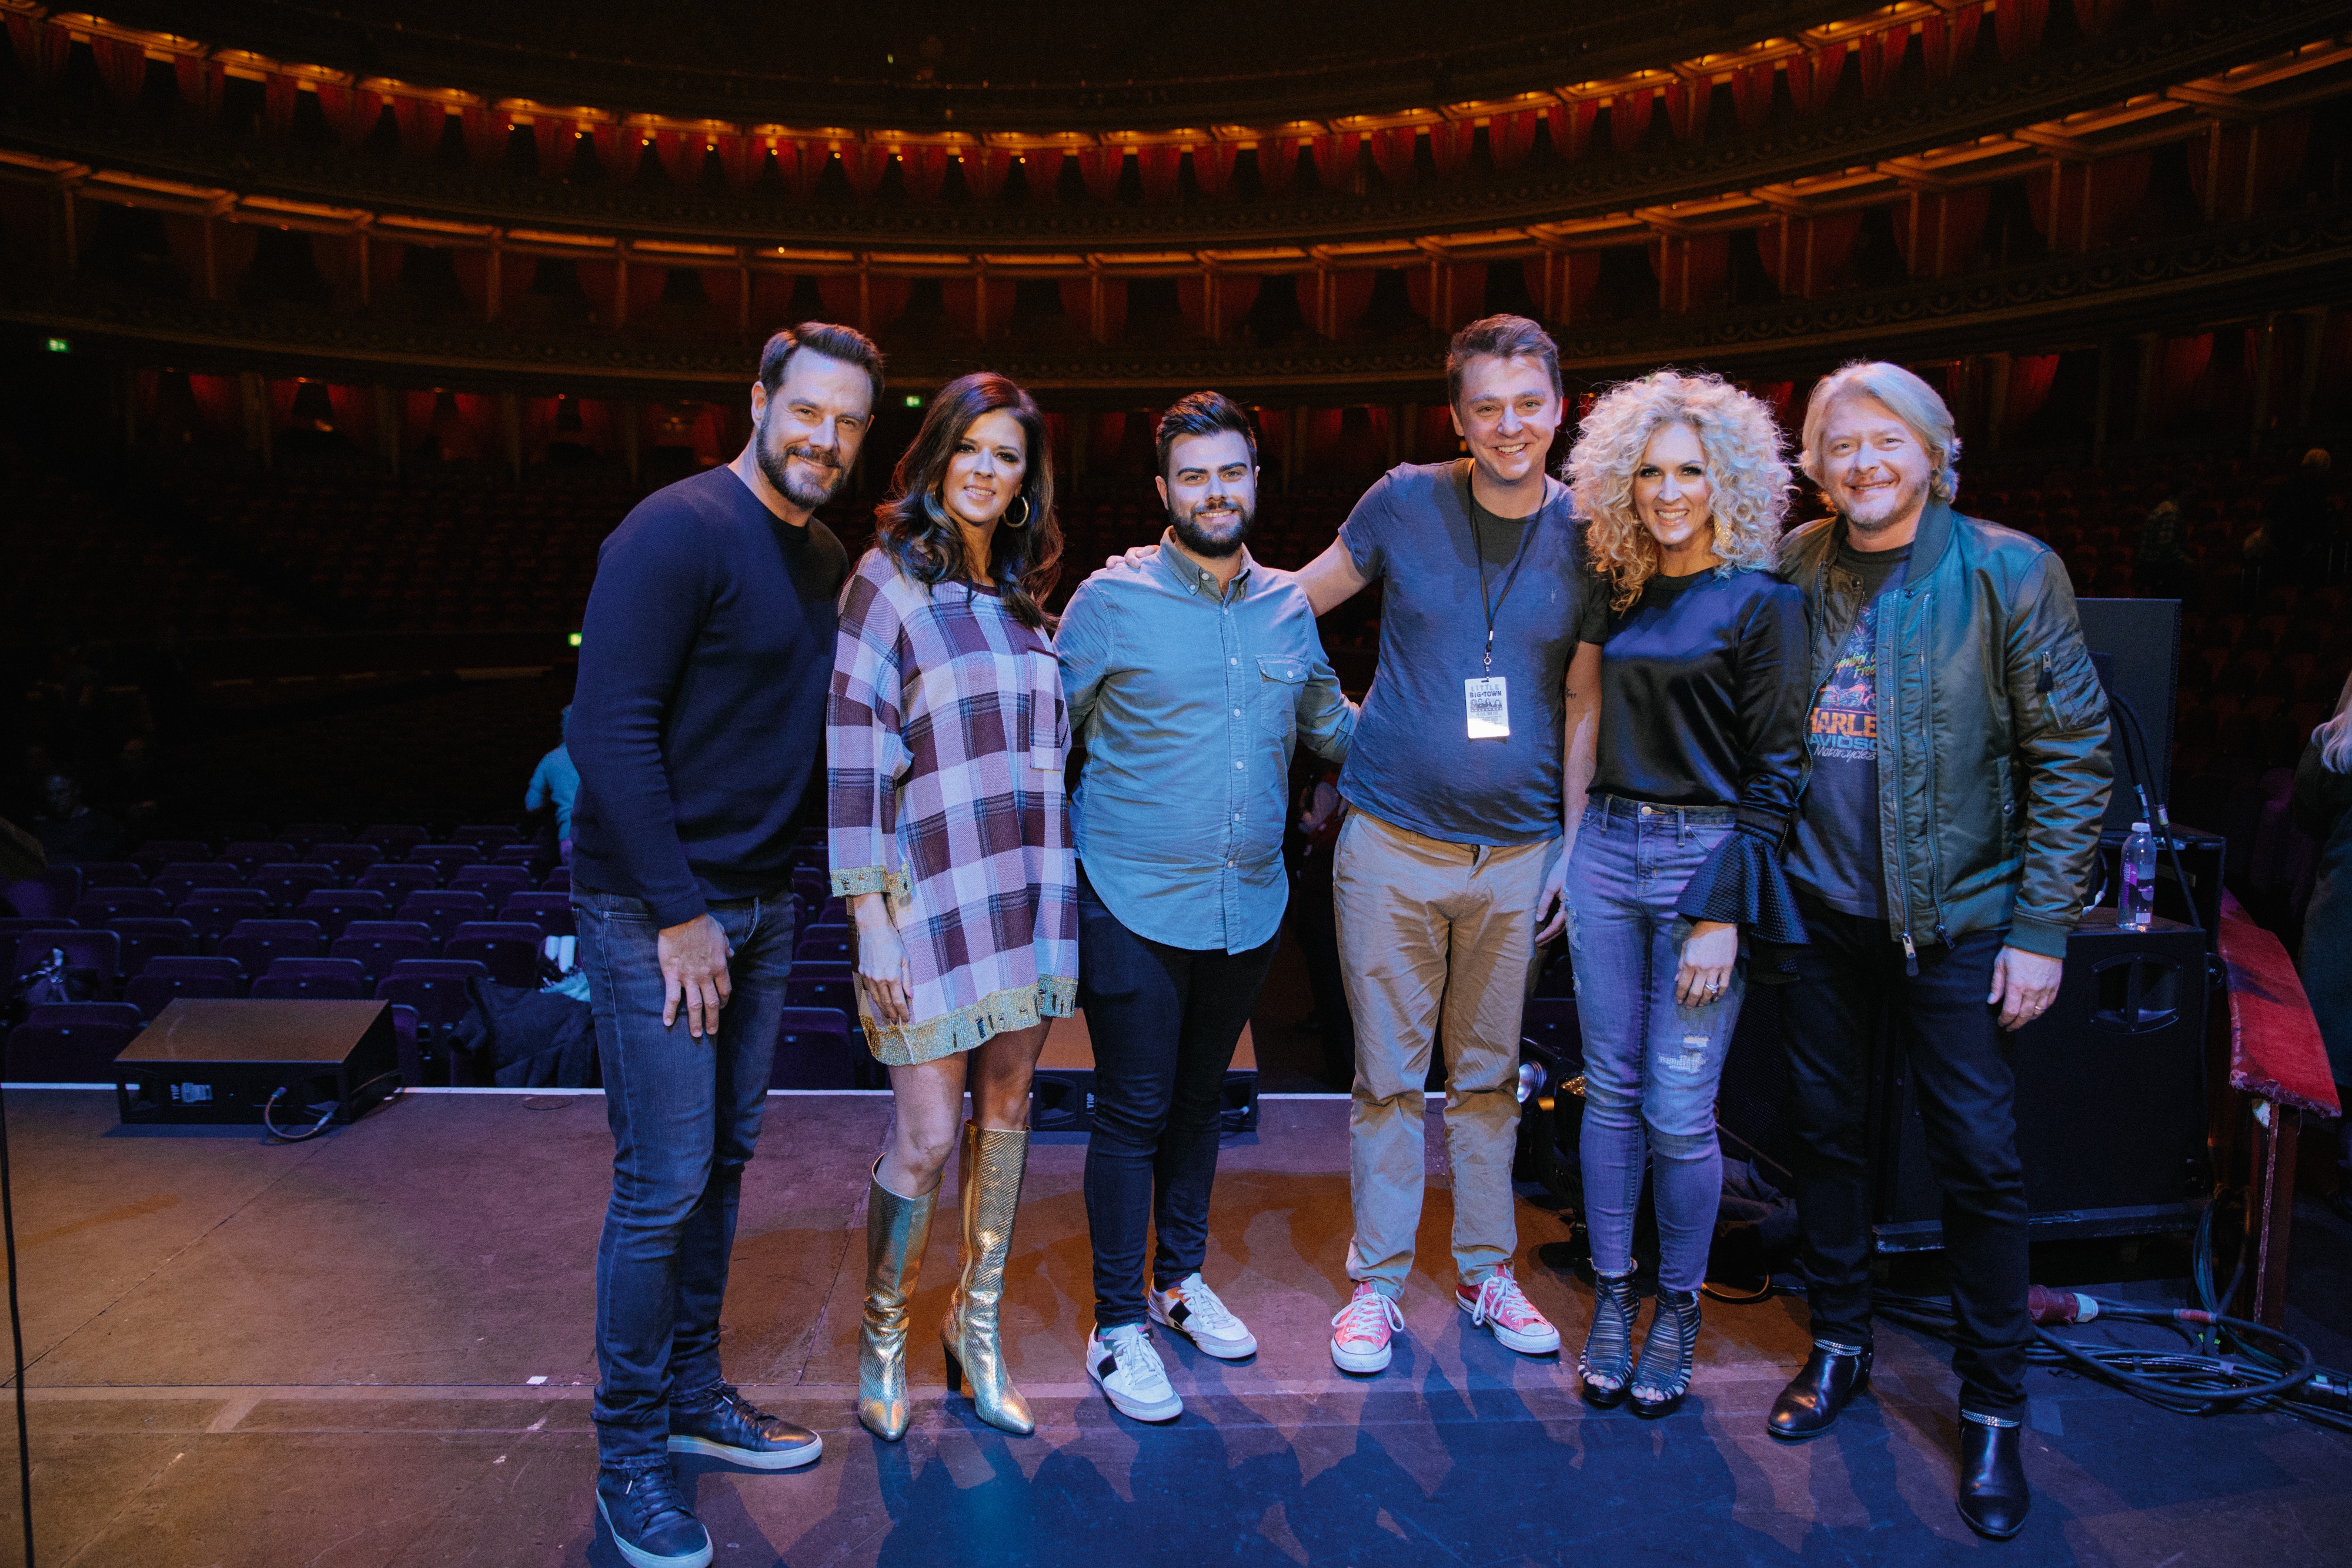 Meeting Little Big Town on stage at the Royal Albert Hall